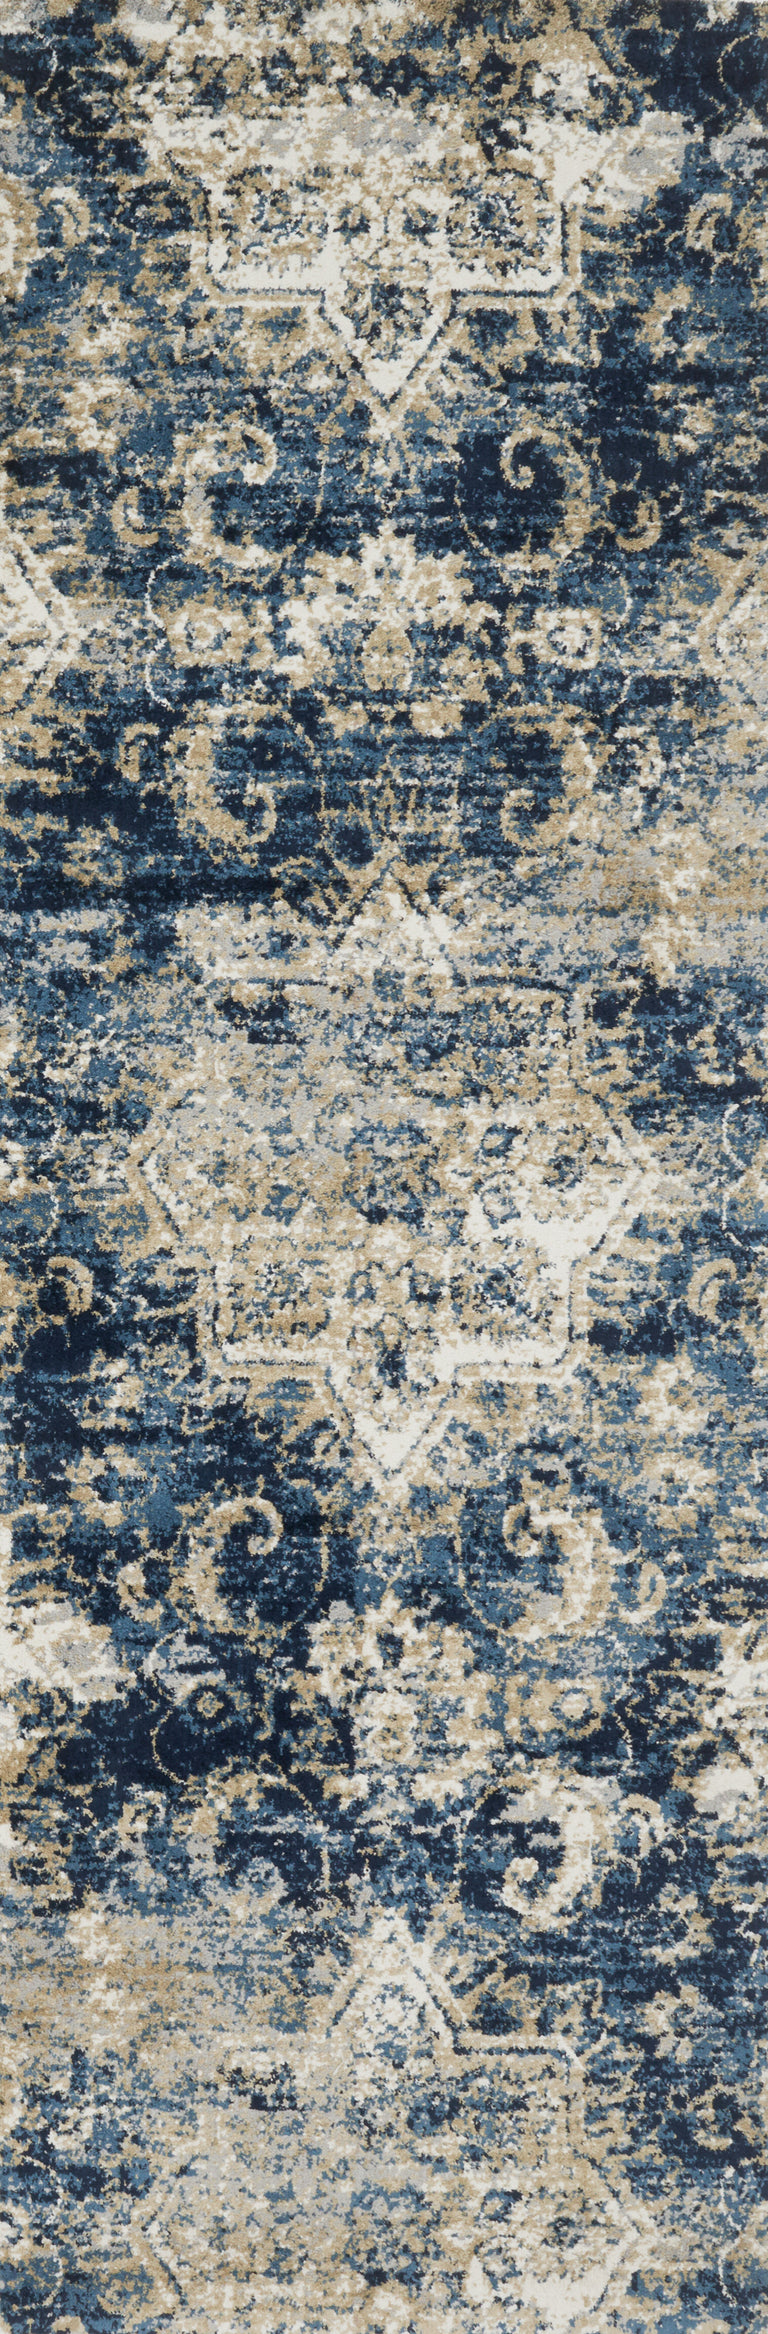 Loloi Rugs Torrance Collection Rug in Navy, Ivory - 7'10" x 10'10"